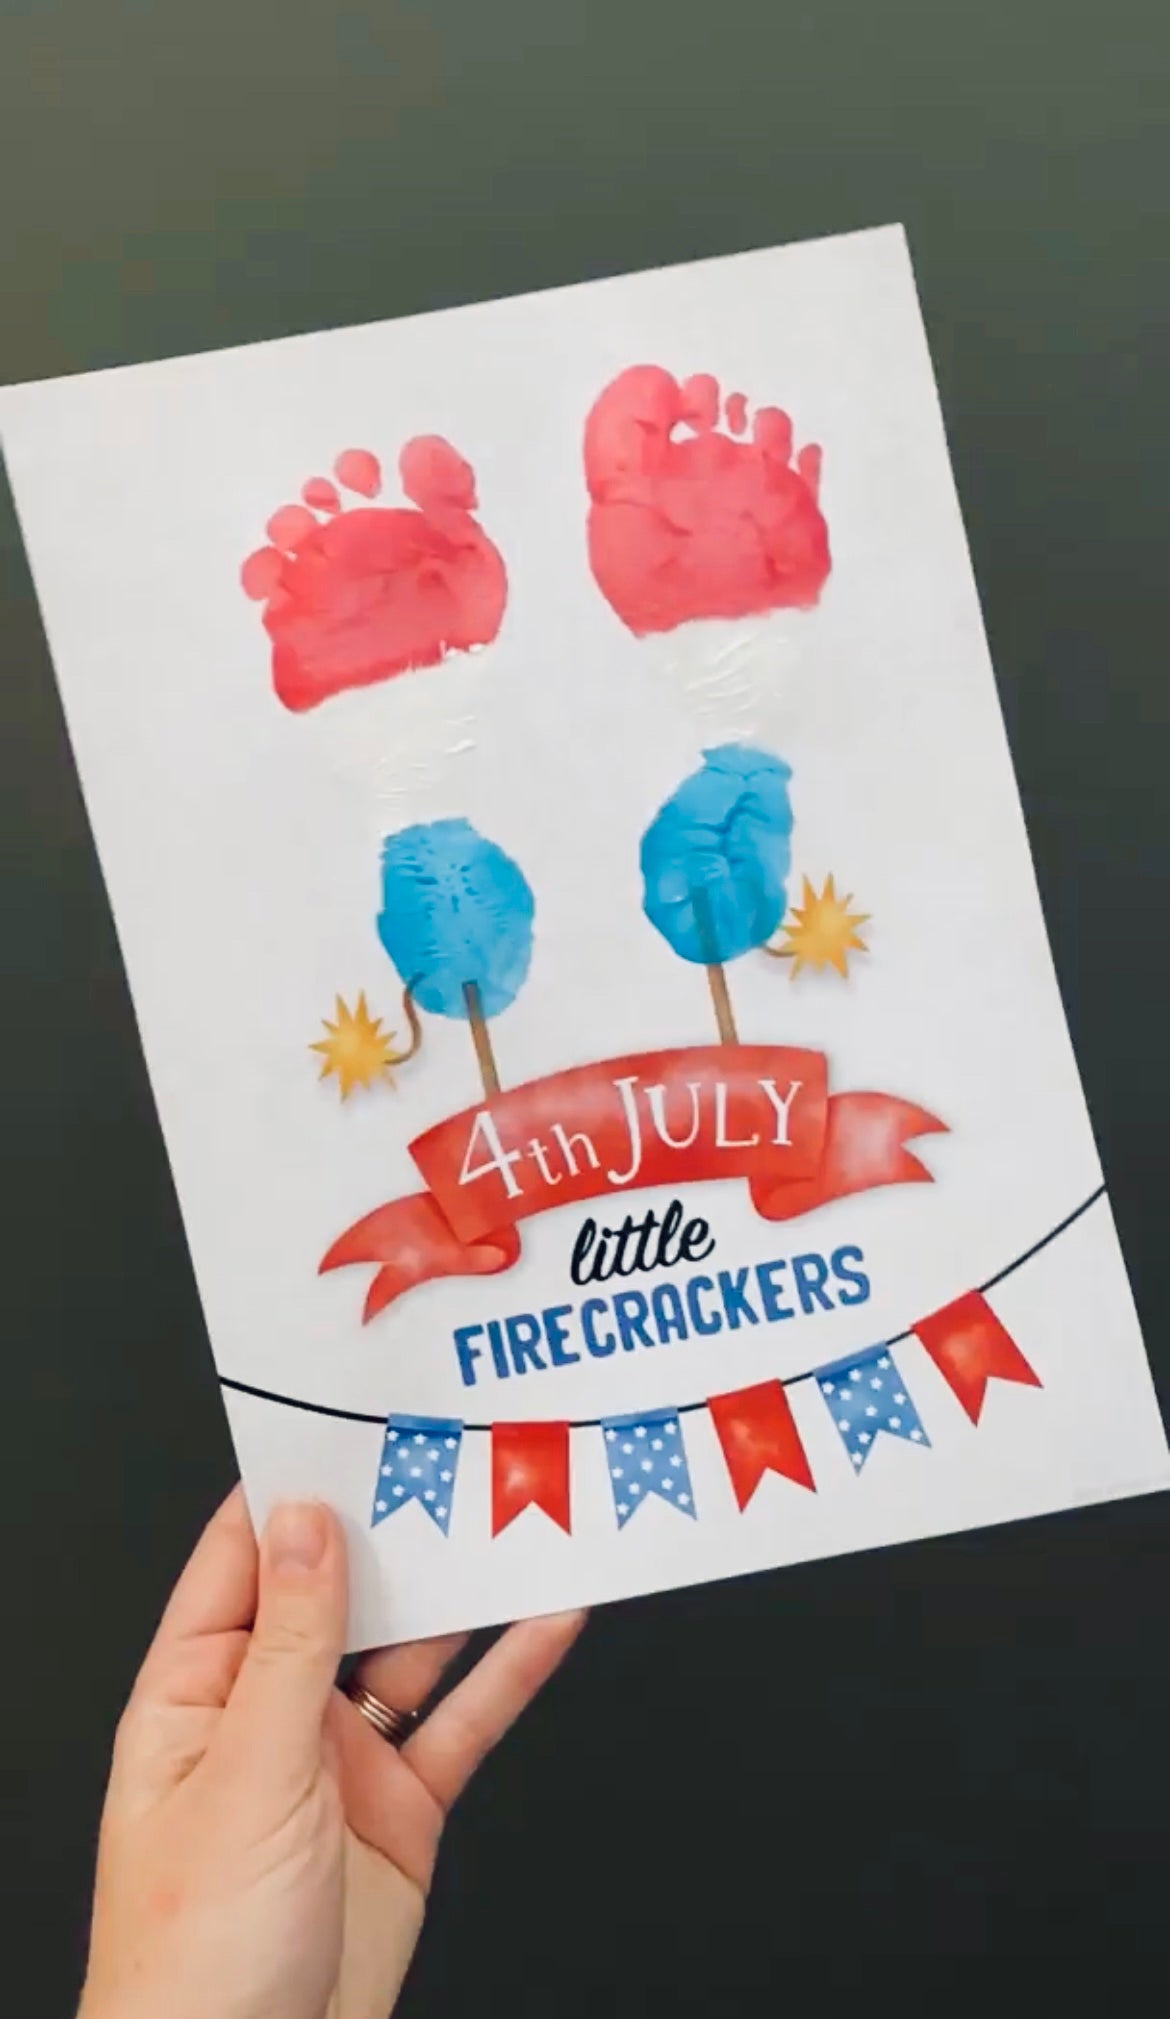 Firecrackers 4th of July / Footprint Handprint Art Craft / First Independence Day USA America / Child Kids Baby Toddler / Print It Off 0528